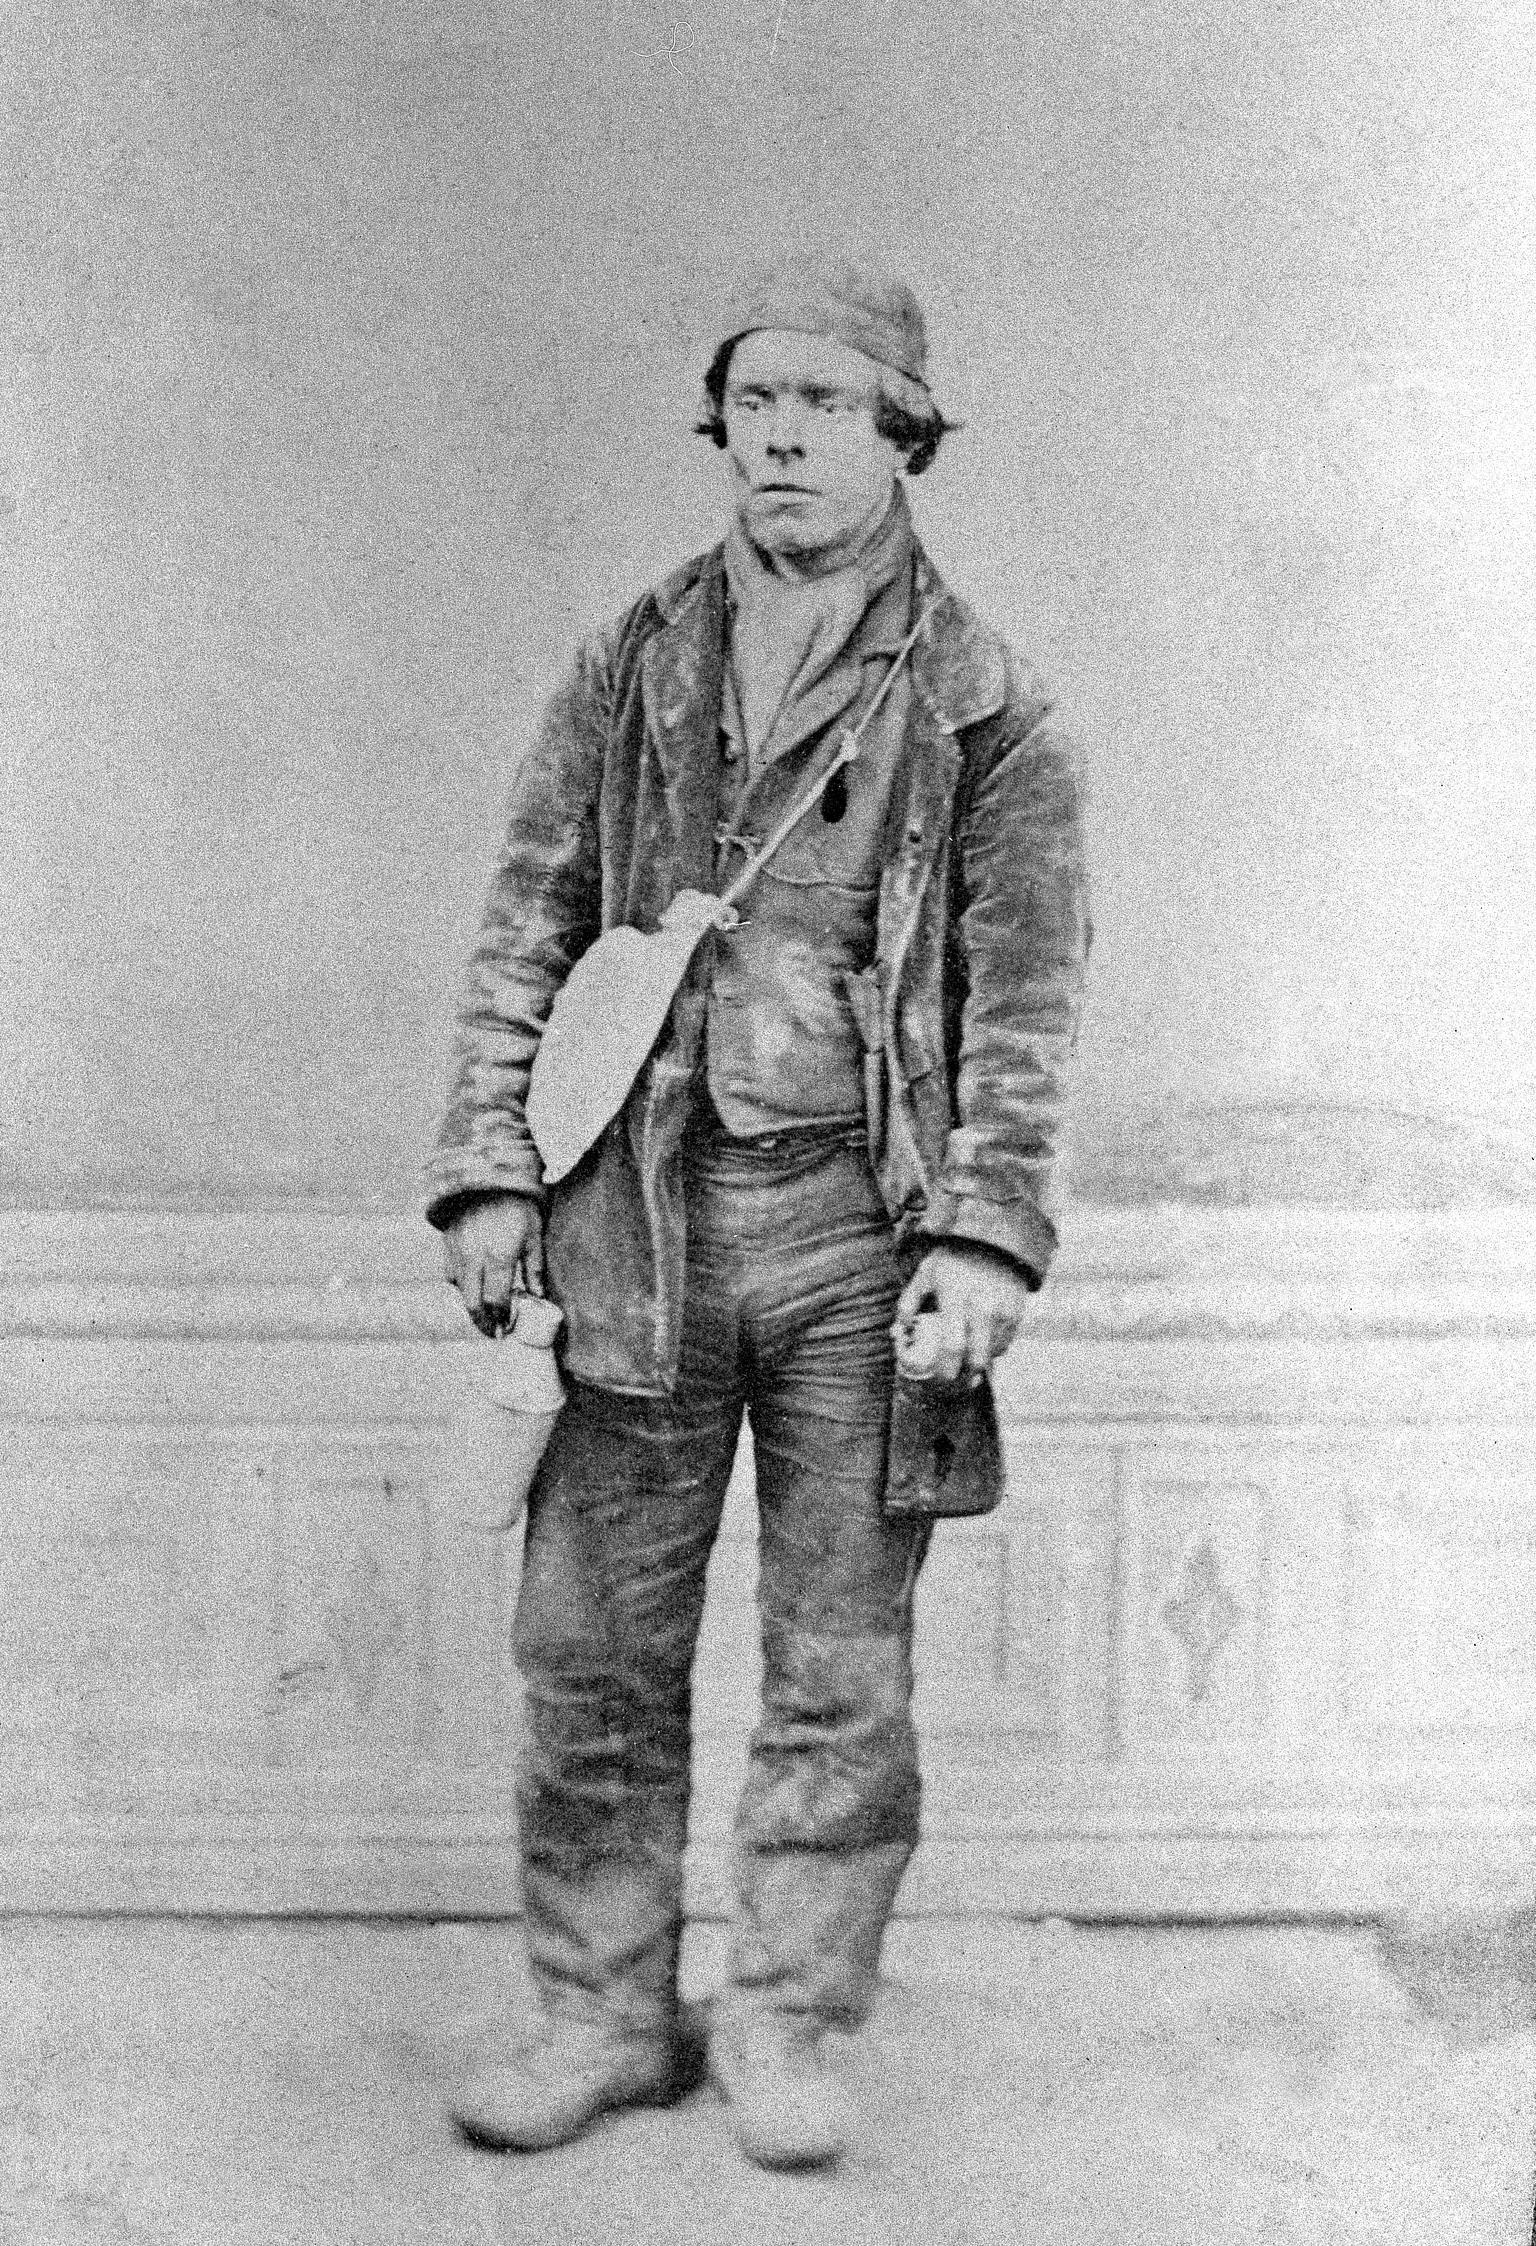 Colliery worker, photograph